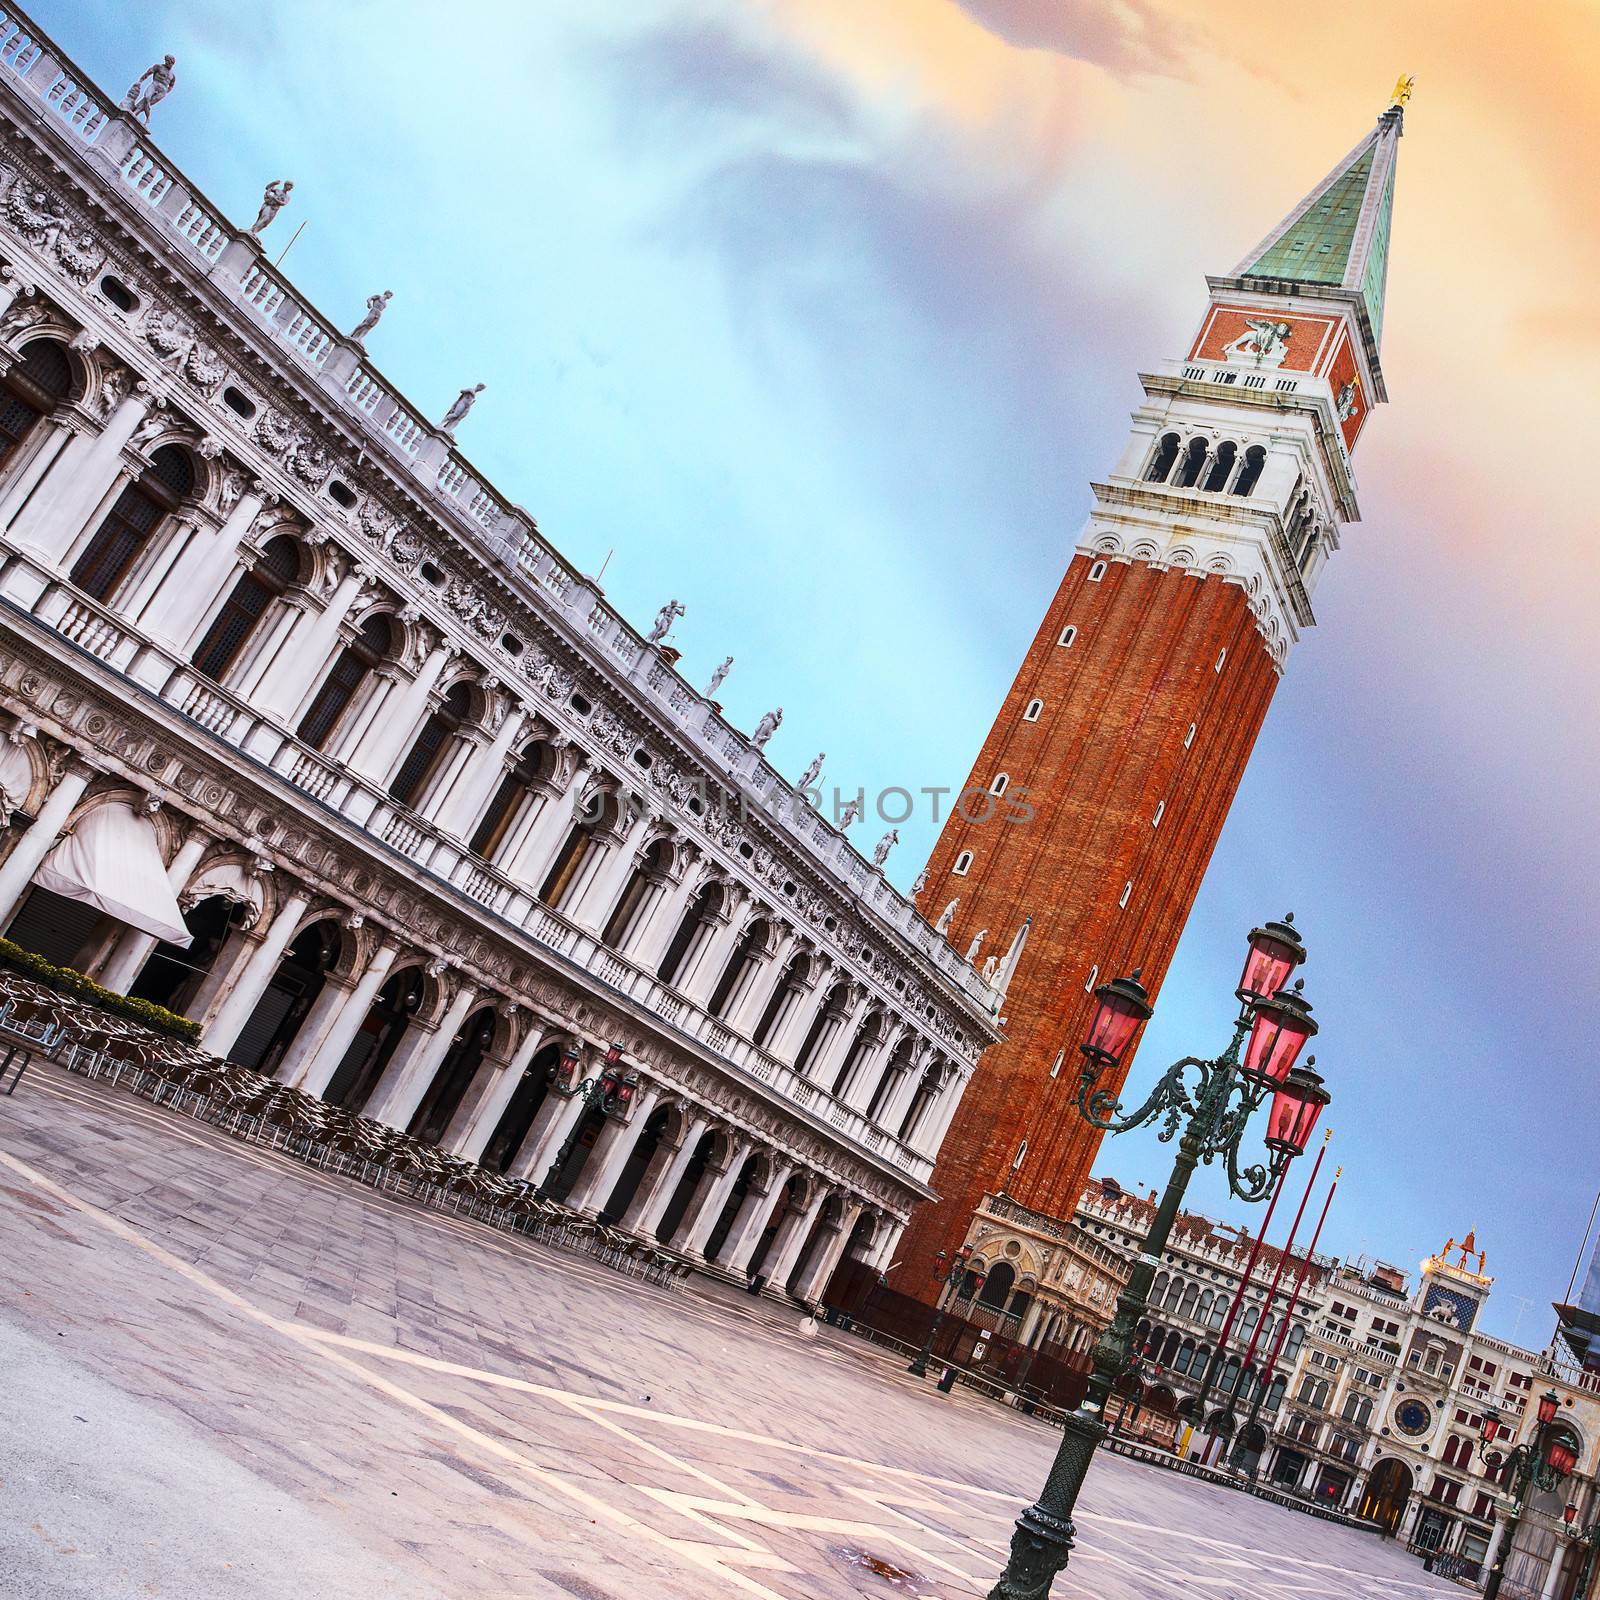 Venice, Italy - Piazza San Marco in the morning 